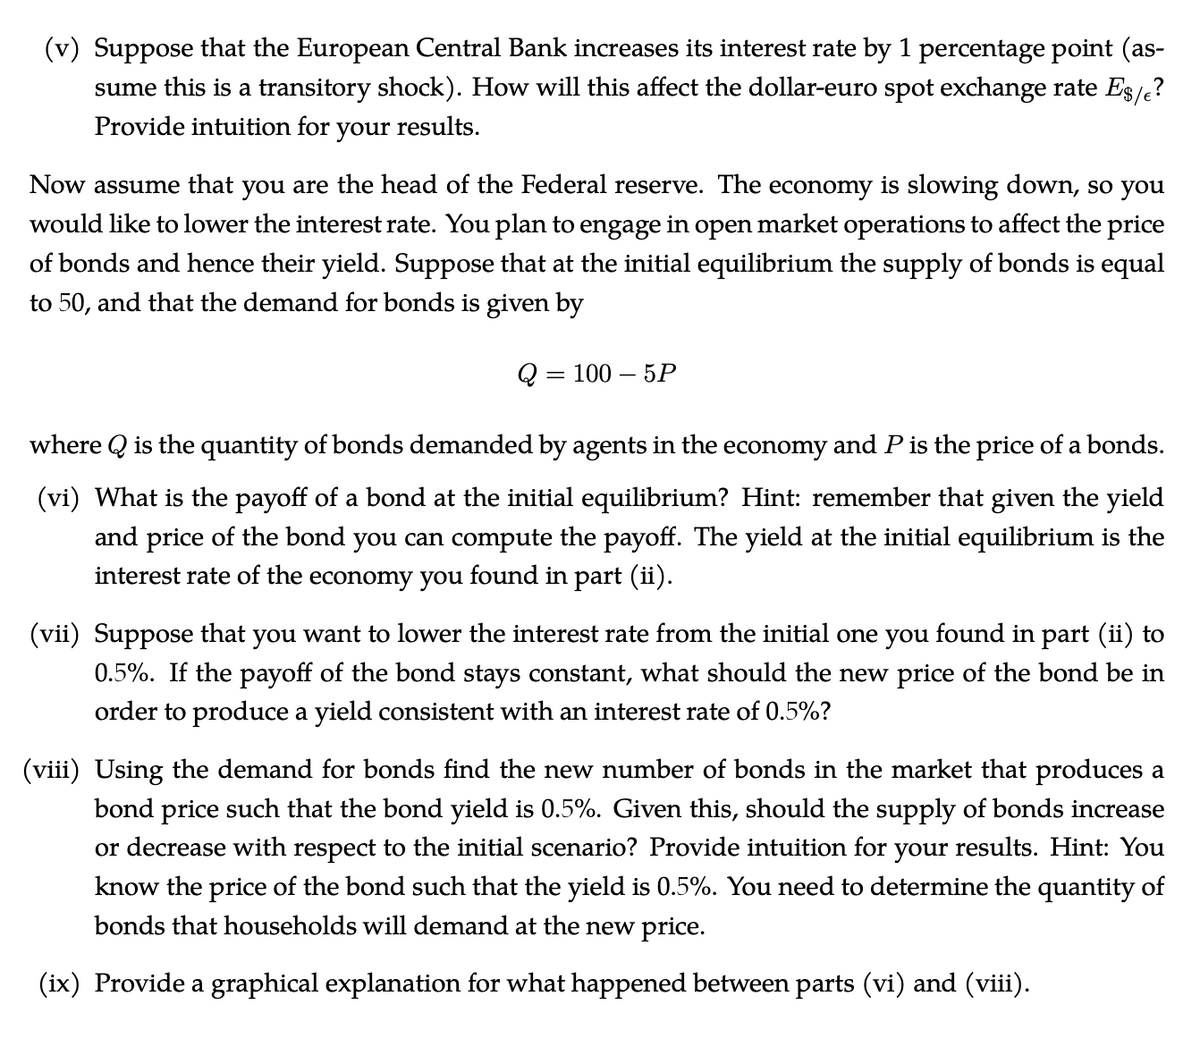 (v) Suppose that the European Central Bank increases its interest rate by 1 percentage point (as-
sume this is a transitory shock). How will this affect the dollar-euro spot exchange rate Es/.?
Provide intuition for
your results.
Now assume that you are the head of the Federal reserve. The economy is slowing down, so you
would like to lower the interest rate. You plan to engage in open market operations to affect the price
of bonds and hence their yield. Suppose that at the initial equilibrium the supply of bonds is equal
to 50, and that the demand for bonds is given by
Q = 100 – 5P
where Q is the quantity of bonds demanded by agents in the economy and Pis the price of a bonds.
(vi) What is the payoff of a bond at the initial equilibrium? Hint: remember that given the yield
and price of the bond you can compute the payoff. The yield at the initial equilibrium is the
interest rate of the economy you found in part (ii).
(vii) Suppose that
you want to lower the interest rate from the initial one you found in part (ii) to
0.5%. If the payoff of the bond stays constant, what should the new price of the bond be in
order to produce a yield consistent with an interest rate of 0.5%?
(viii) Using the demand for bonds find the new number of bonds in the market that produces a
bond price such that the bond yield is 0.5%. Given this, should the supply of bonds increase
or decrease with respect to the initial scenario? Provide intuition for your results. Hint: You
know the price of the bond such that the yield is 0.5%. You need to determine the quantity of
bonds that households will demand at the new price.
(ix) Provide a graphical explanation for what happened between parts (vi) and (viii).
